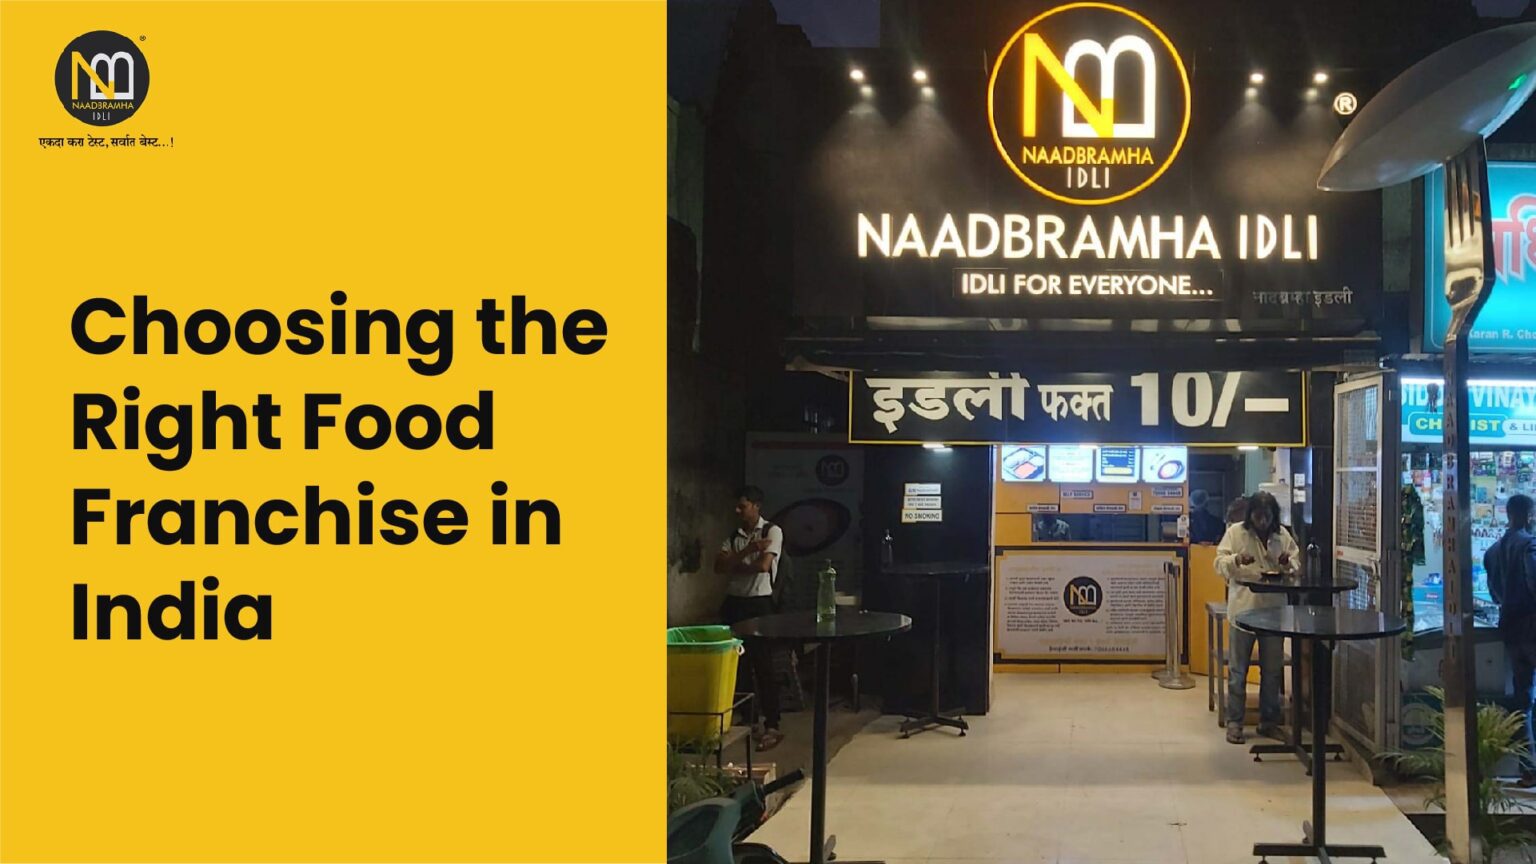 Choosing the Right Food Franchise in India